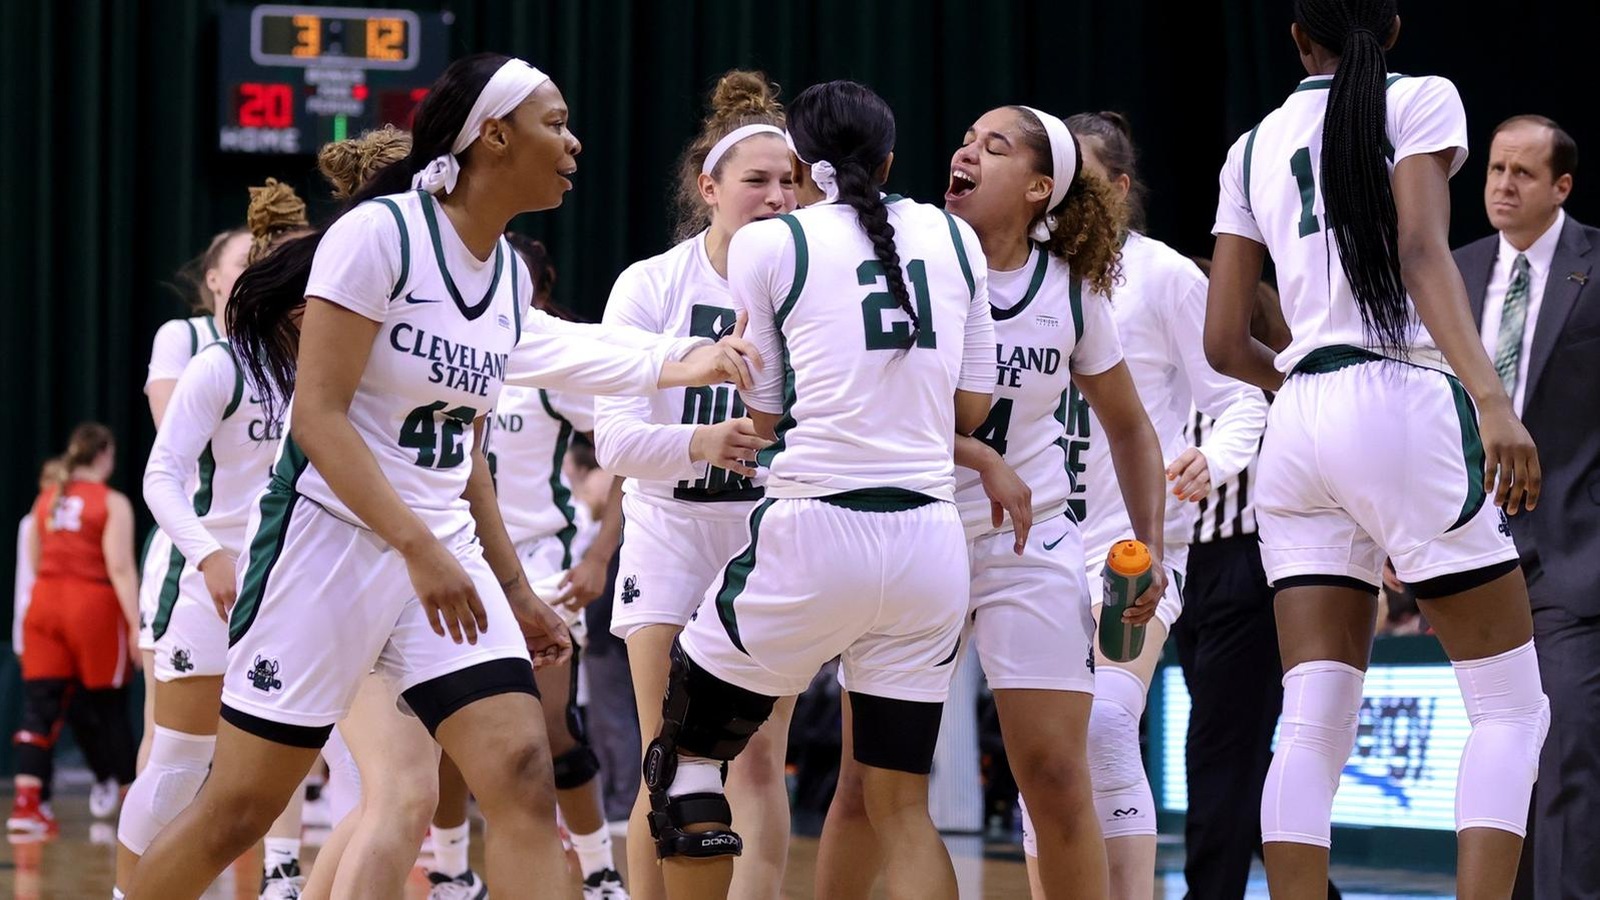 Women’s Basketball Earns 84-48 Victory Over YSU In #HLWBB First Round